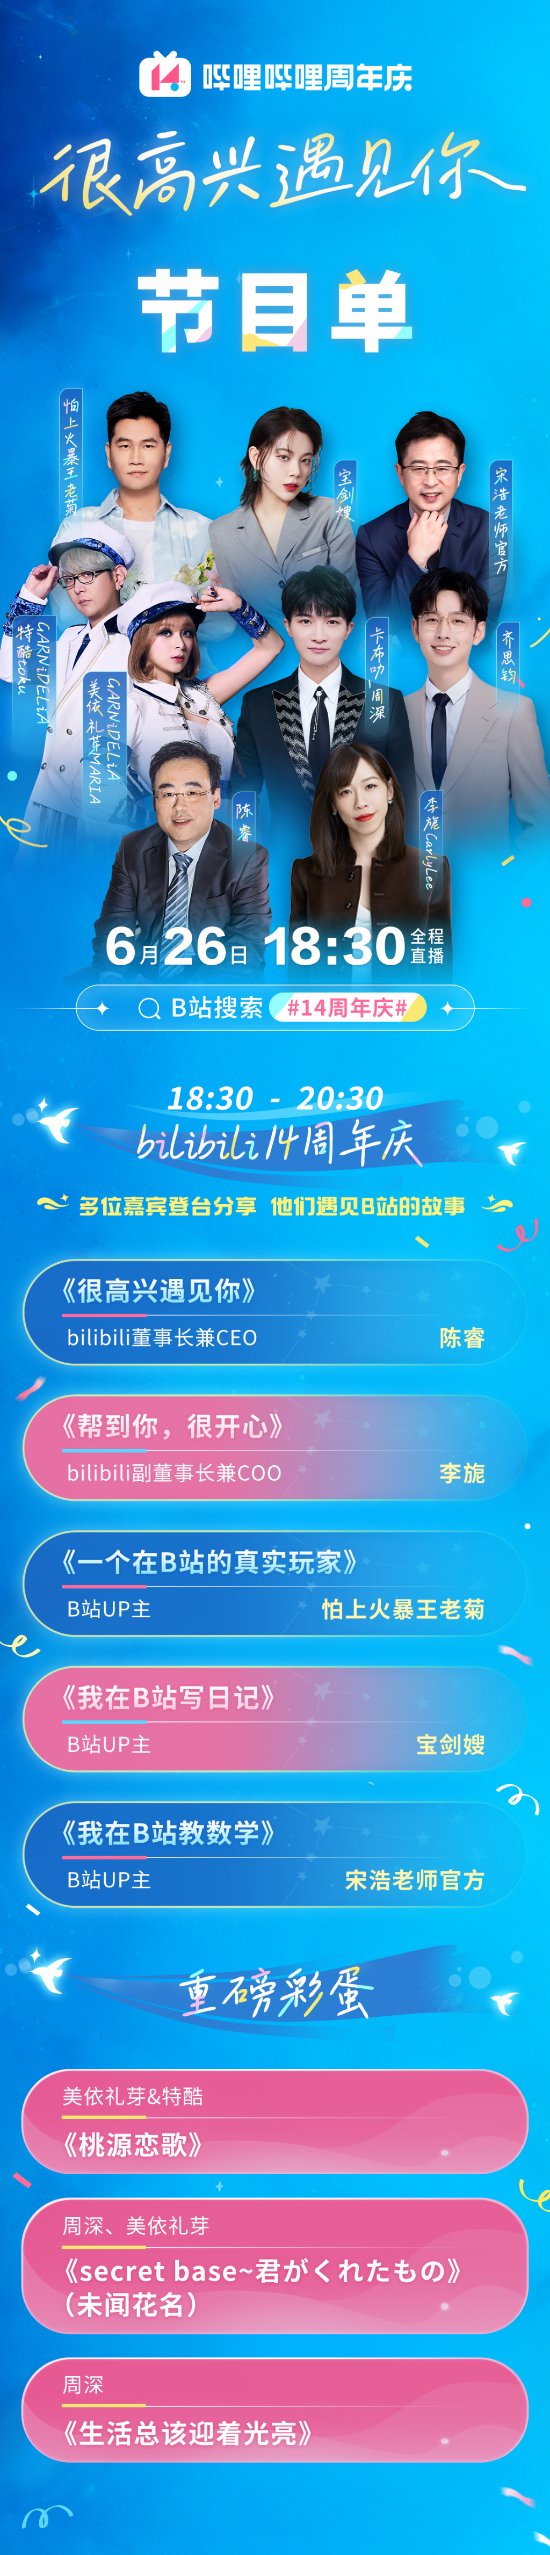 Bilibili's 14th Anniversary Celebration to be Livestreamed Tonight: Chen Rui and Others to Share Stories!